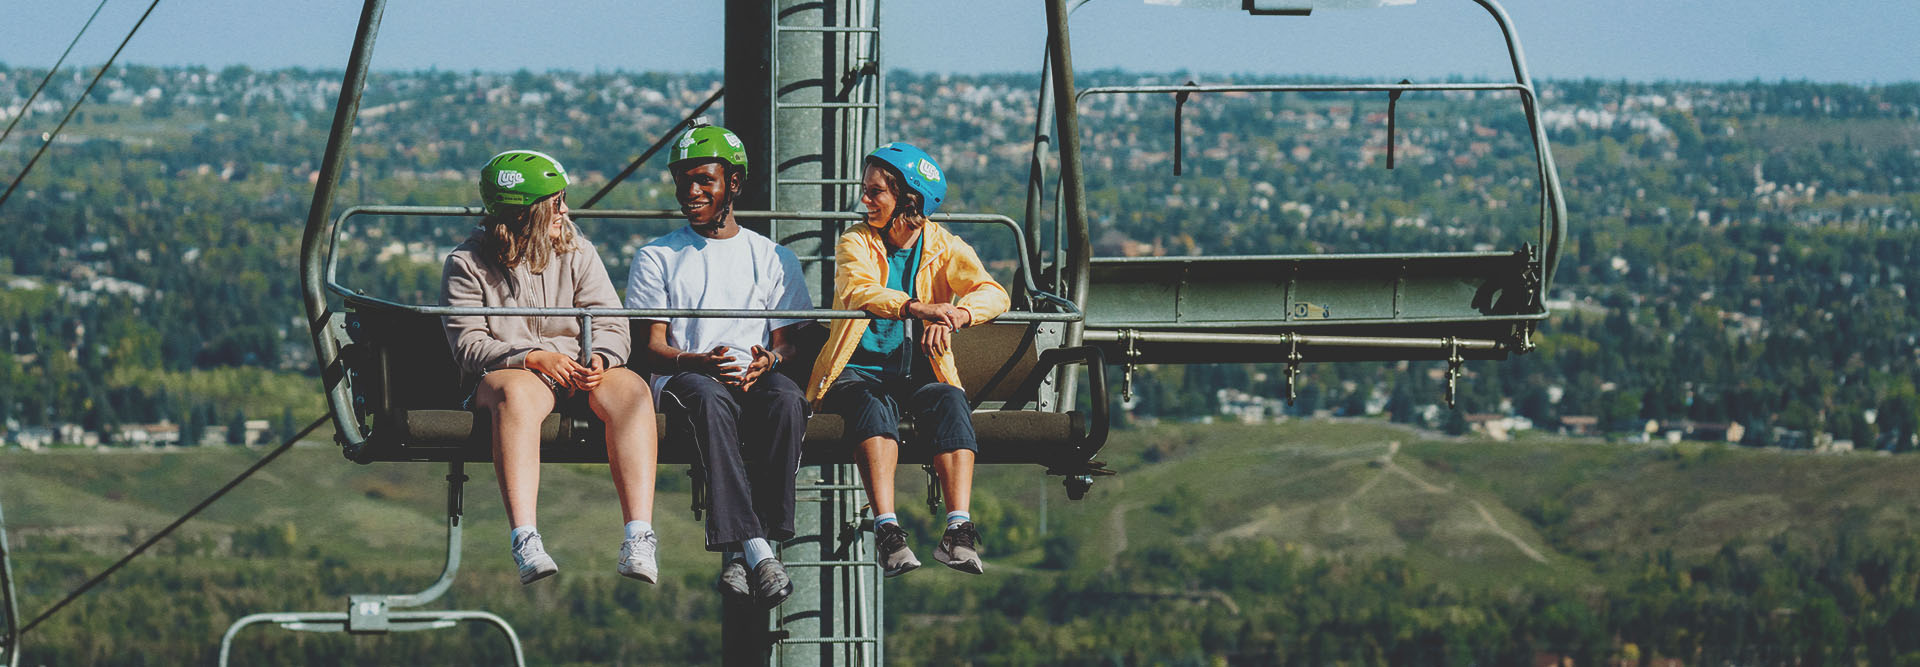 friends riding the WinSport chairlift up to Downhill Karting